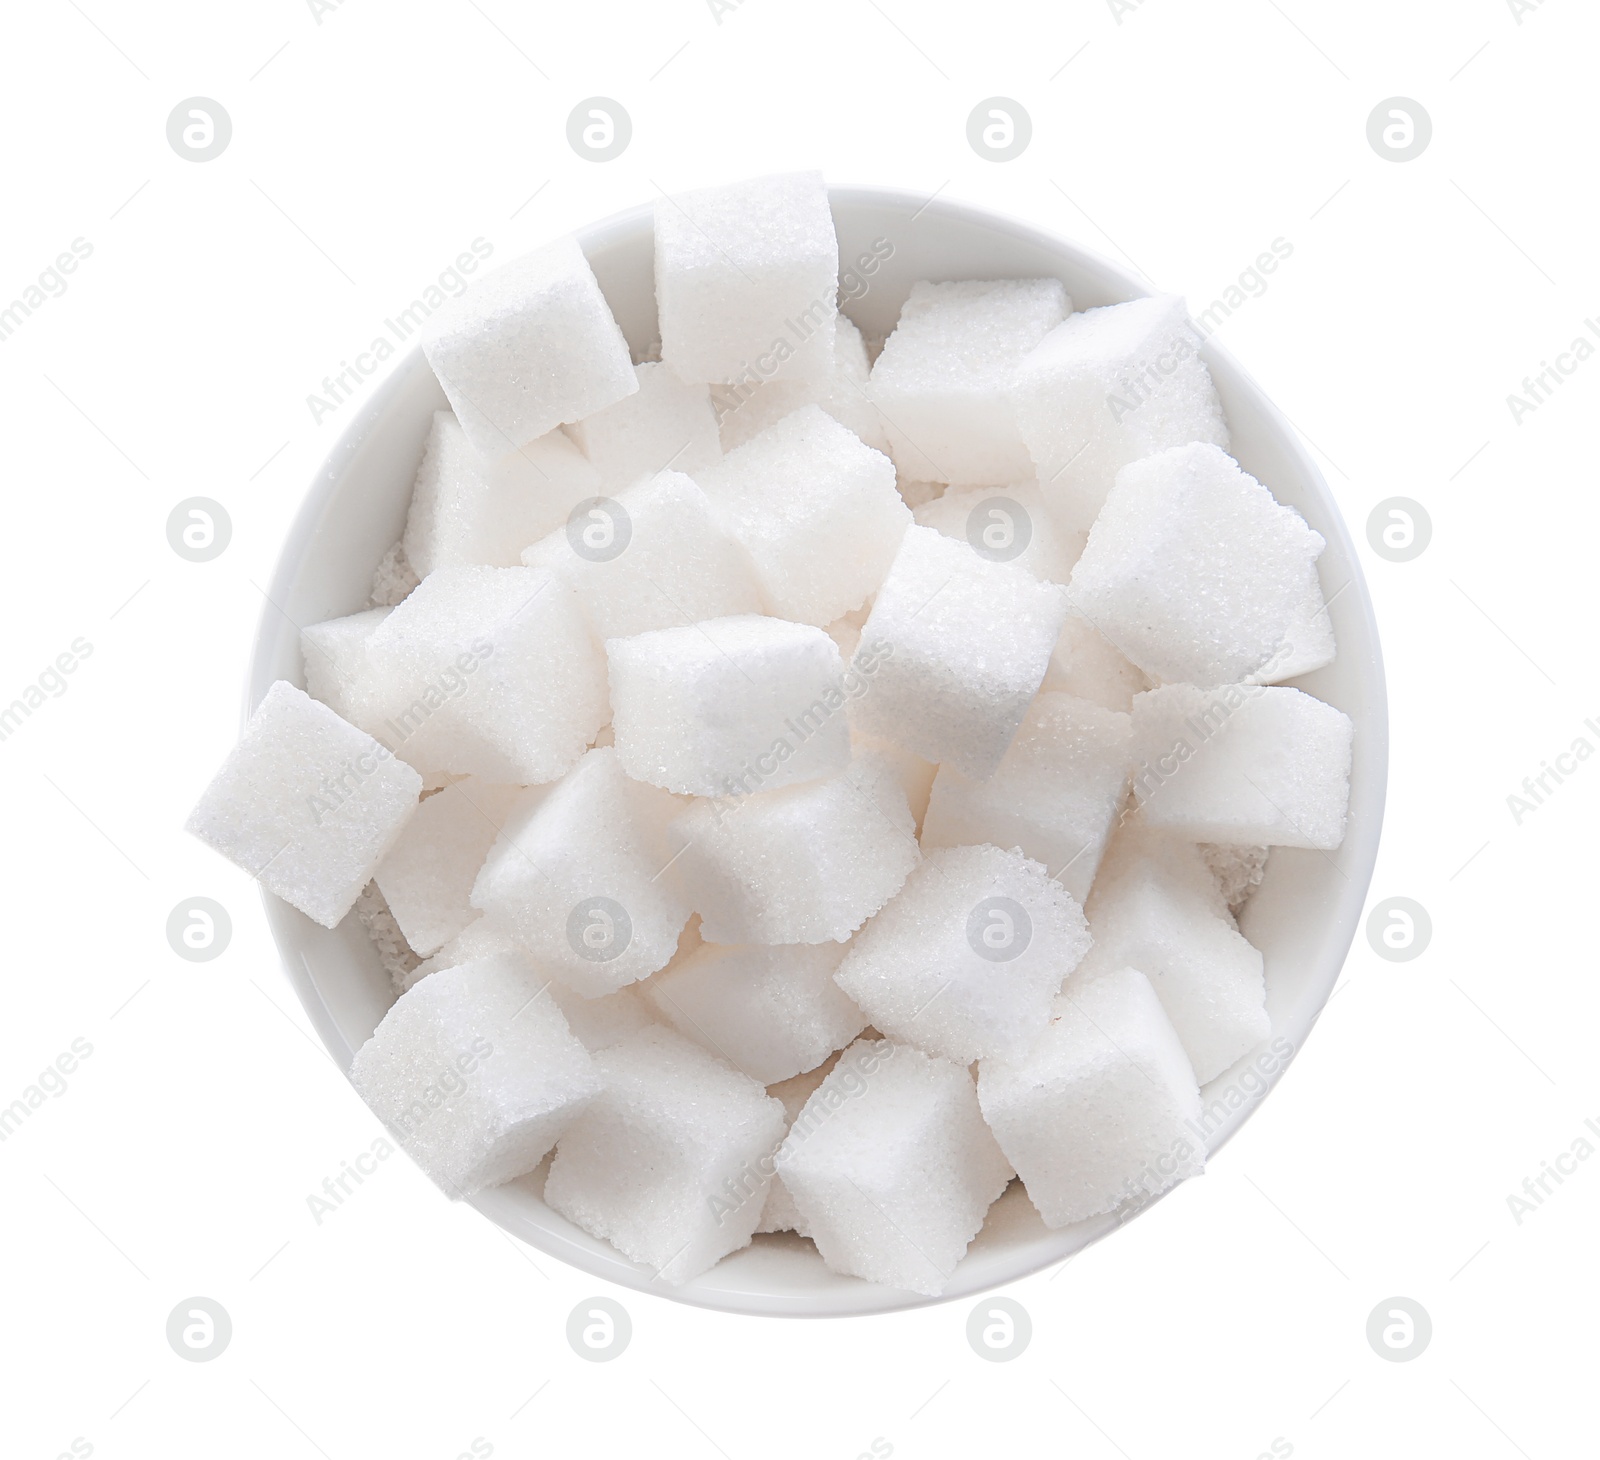 Photo of Refined sugar cubes in bowl on white background, top view